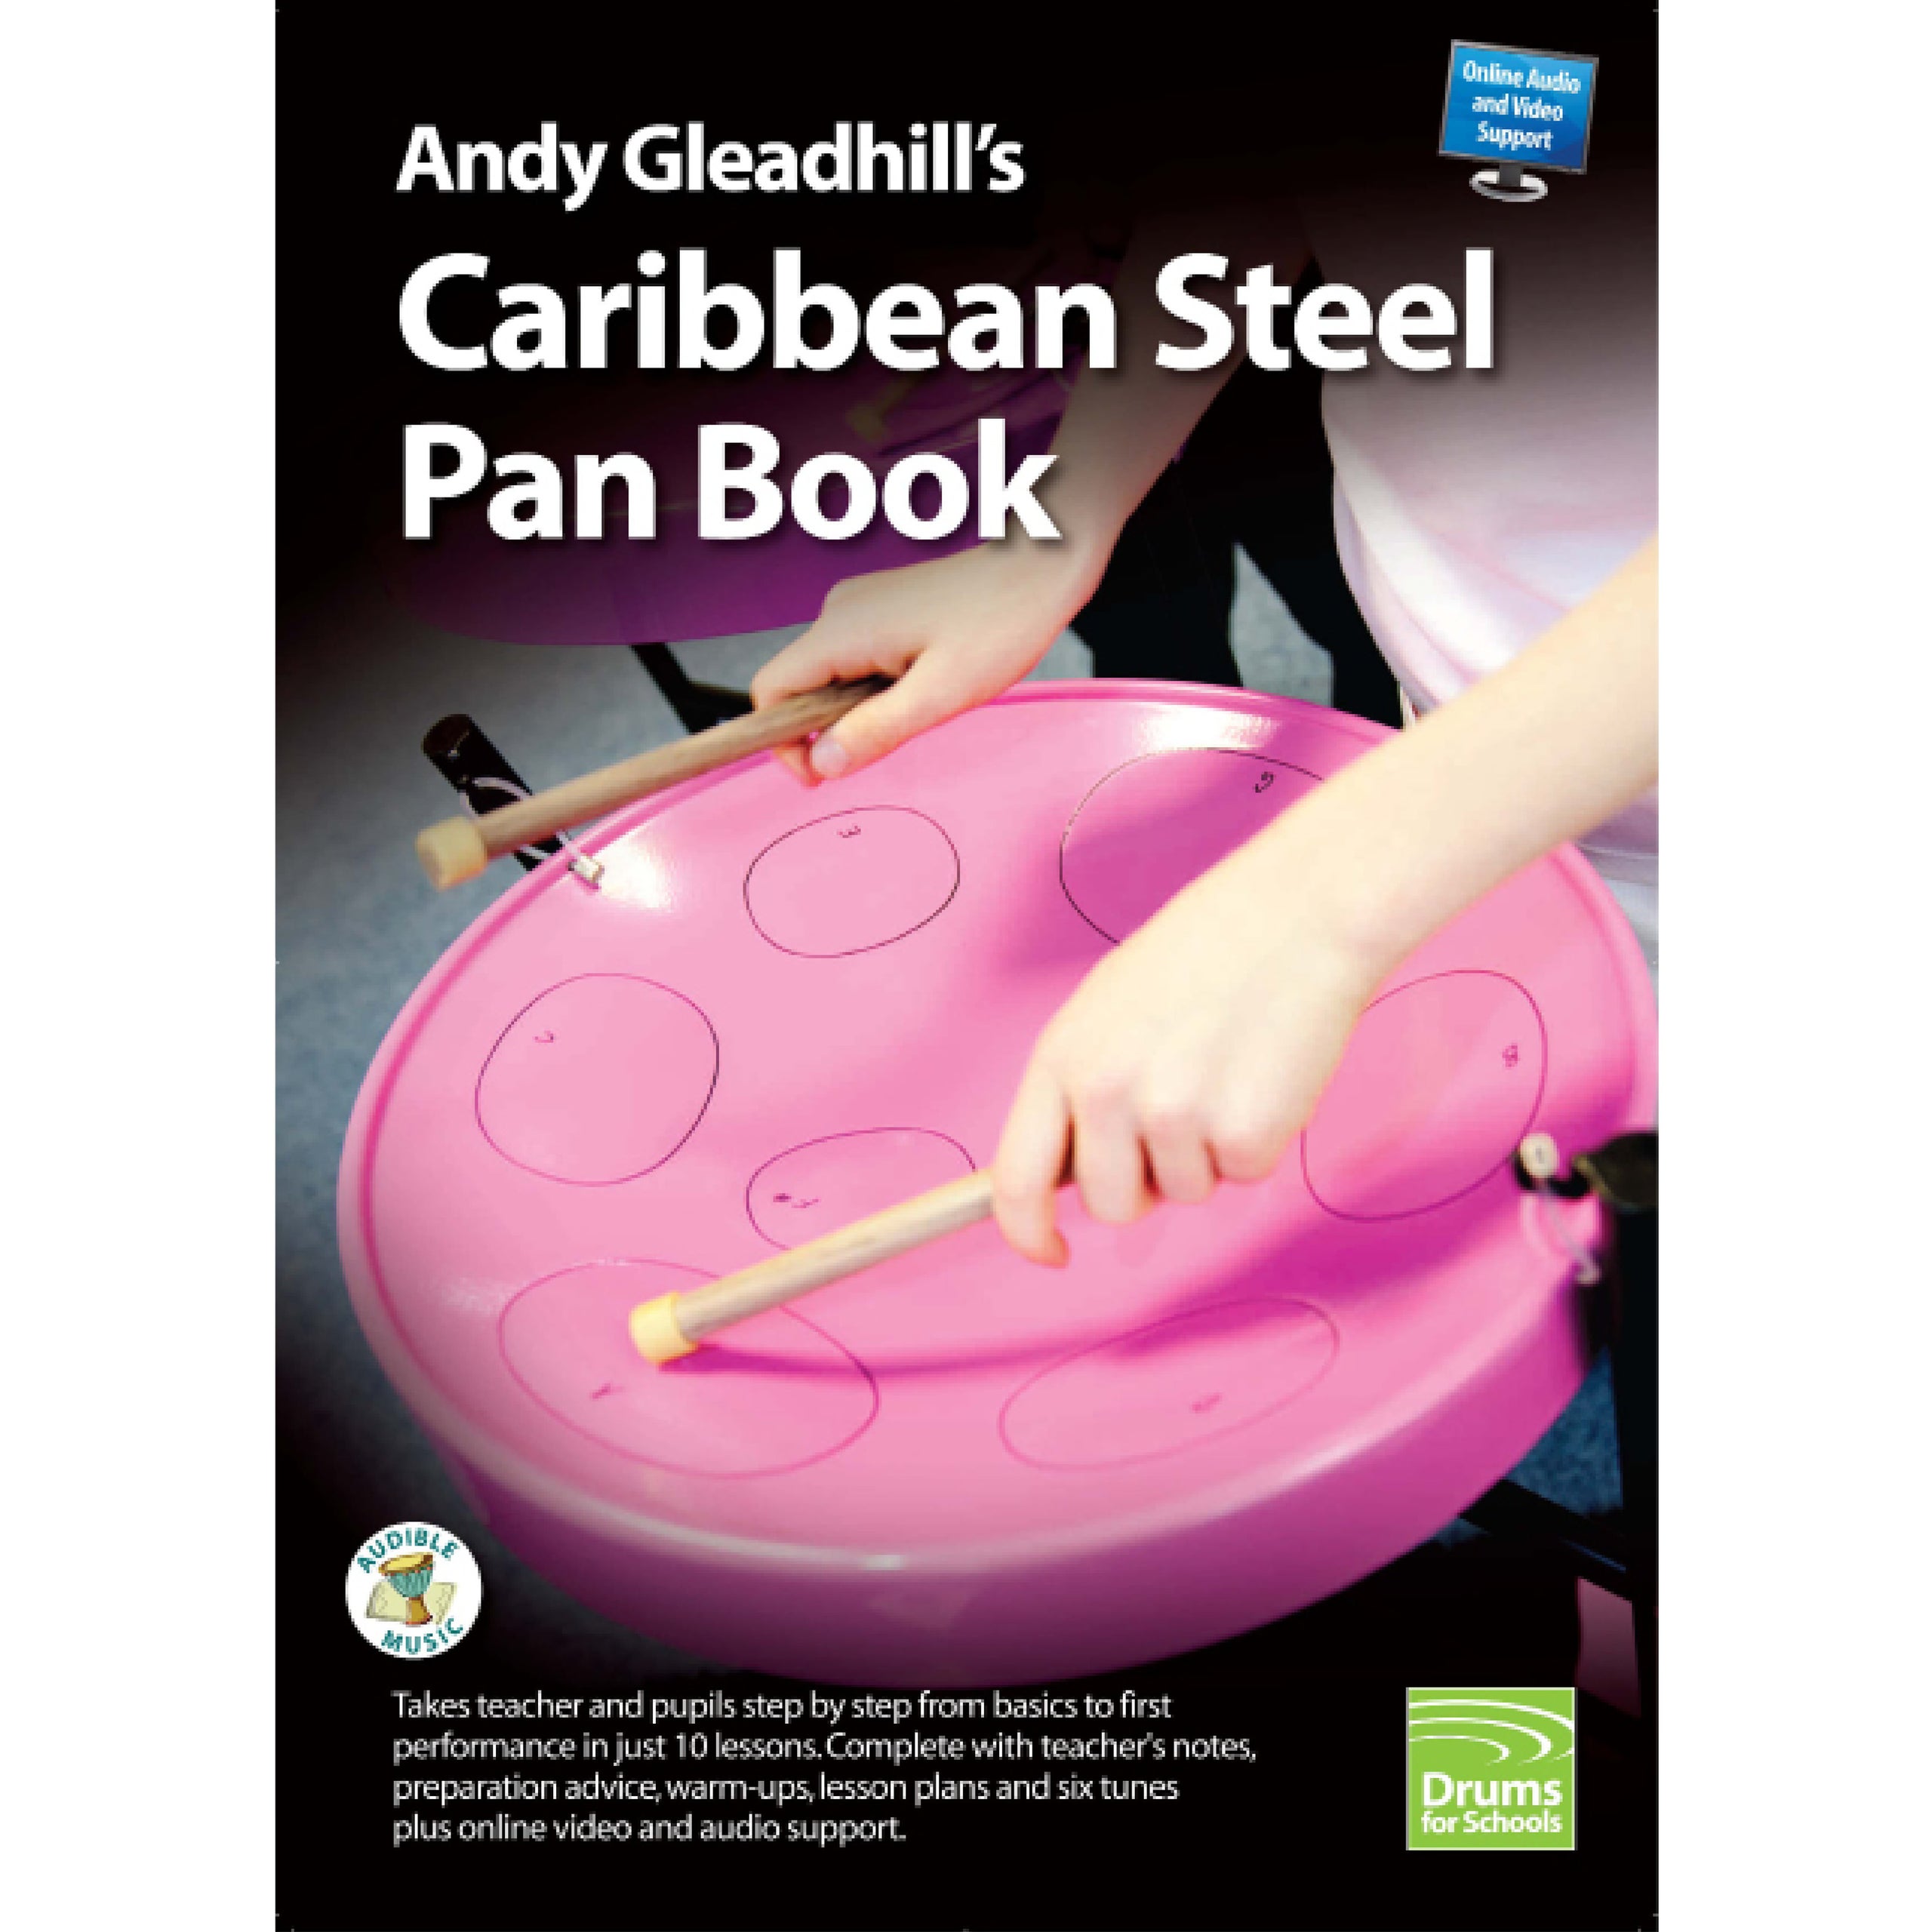 Guide to Steel Drums